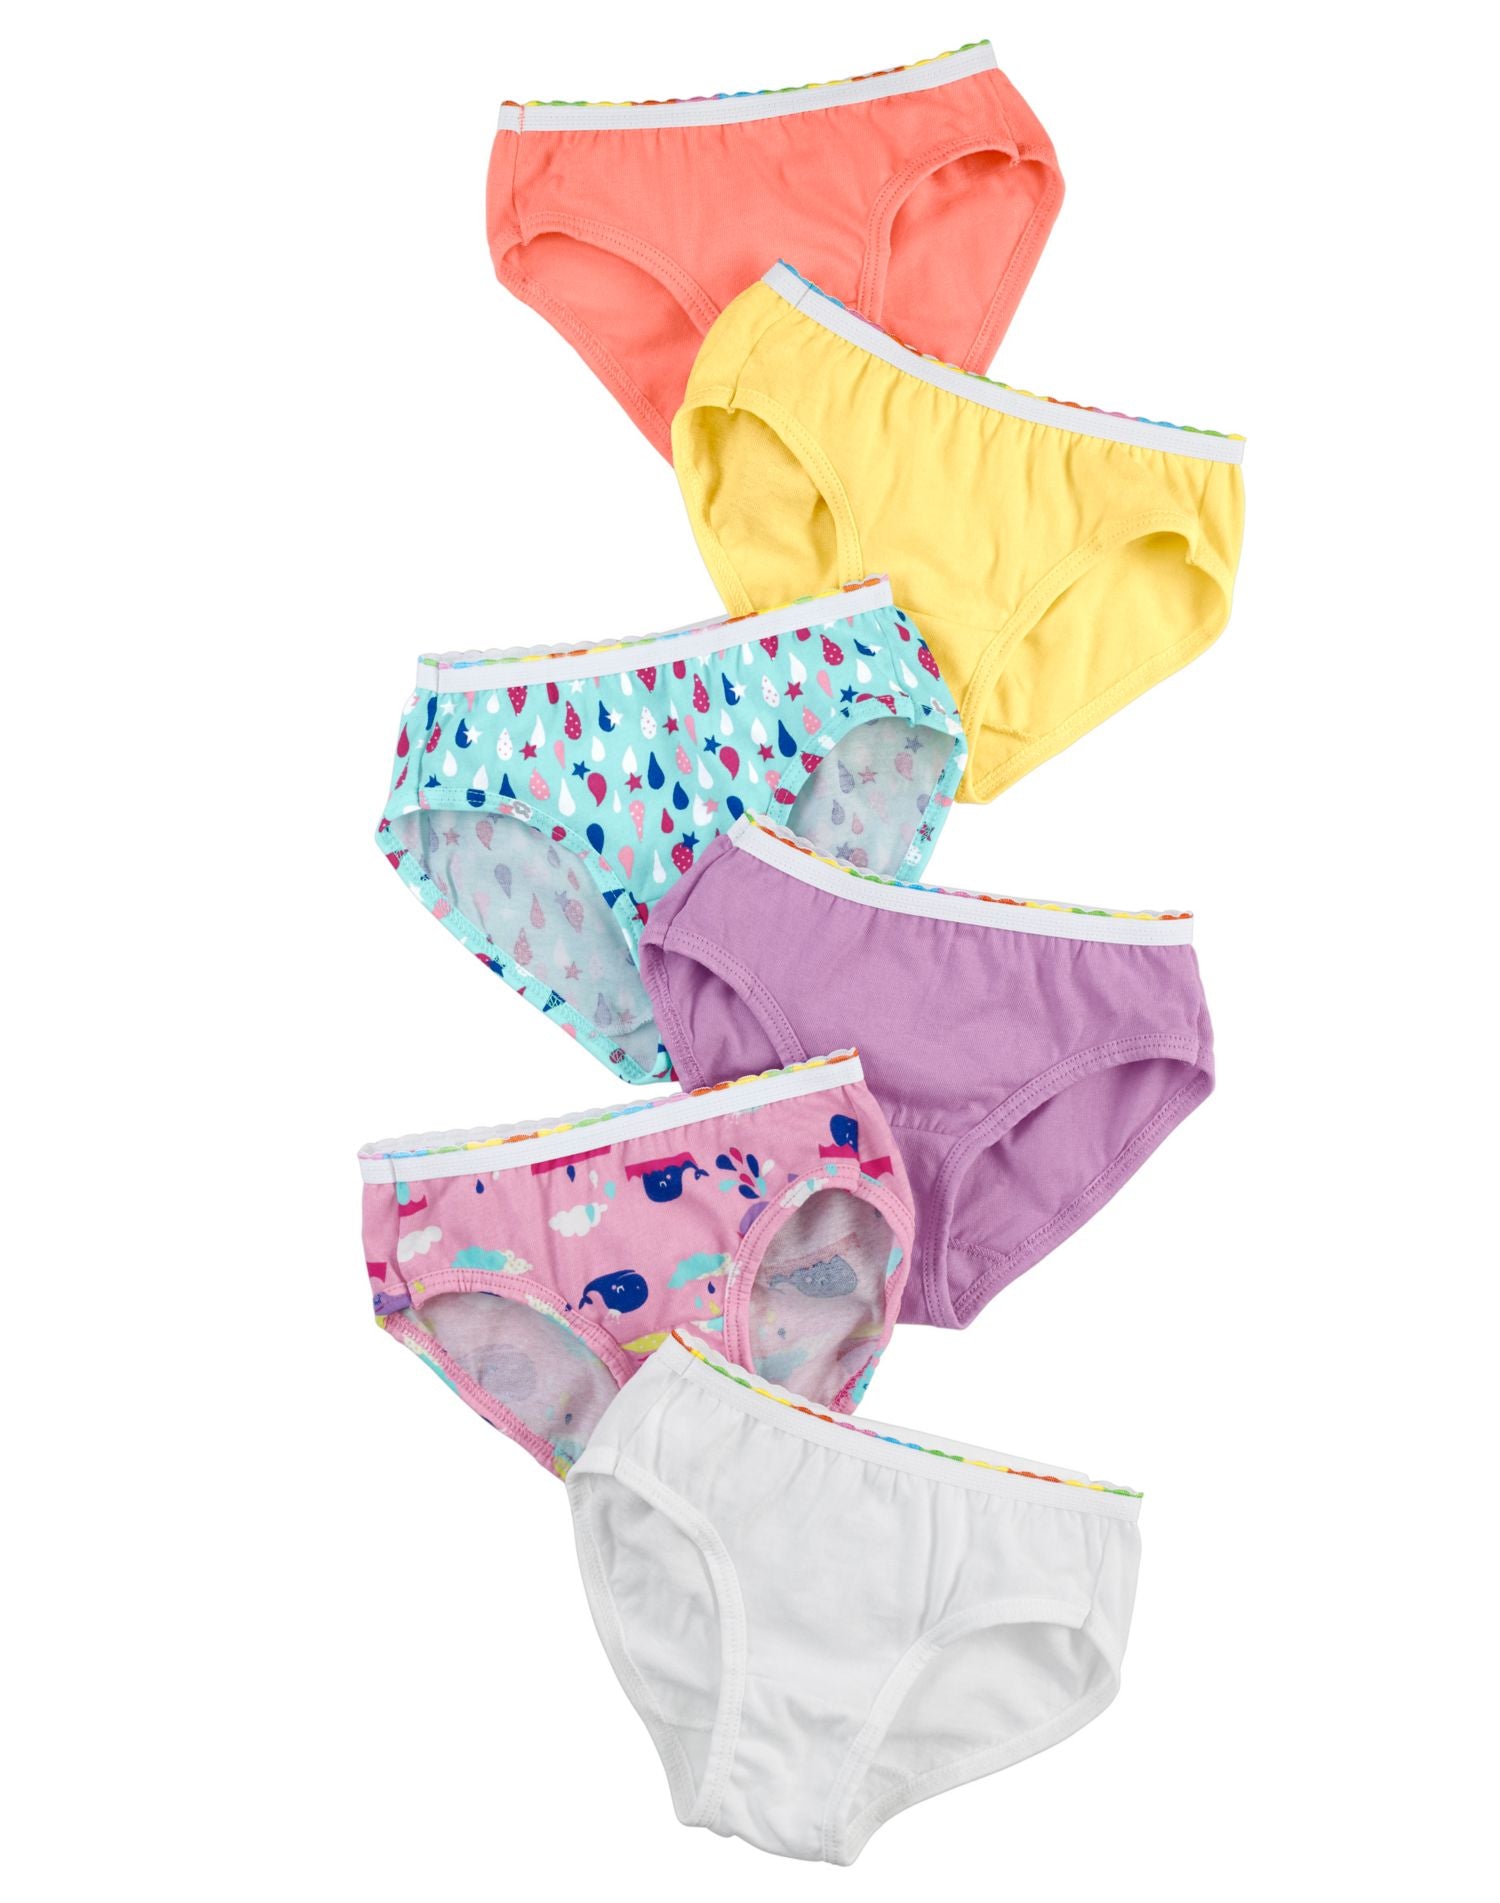  Hanes Girls 100% Cotton Tagless Panties, Available In 10 And  20 Pack Briefs, Assorted